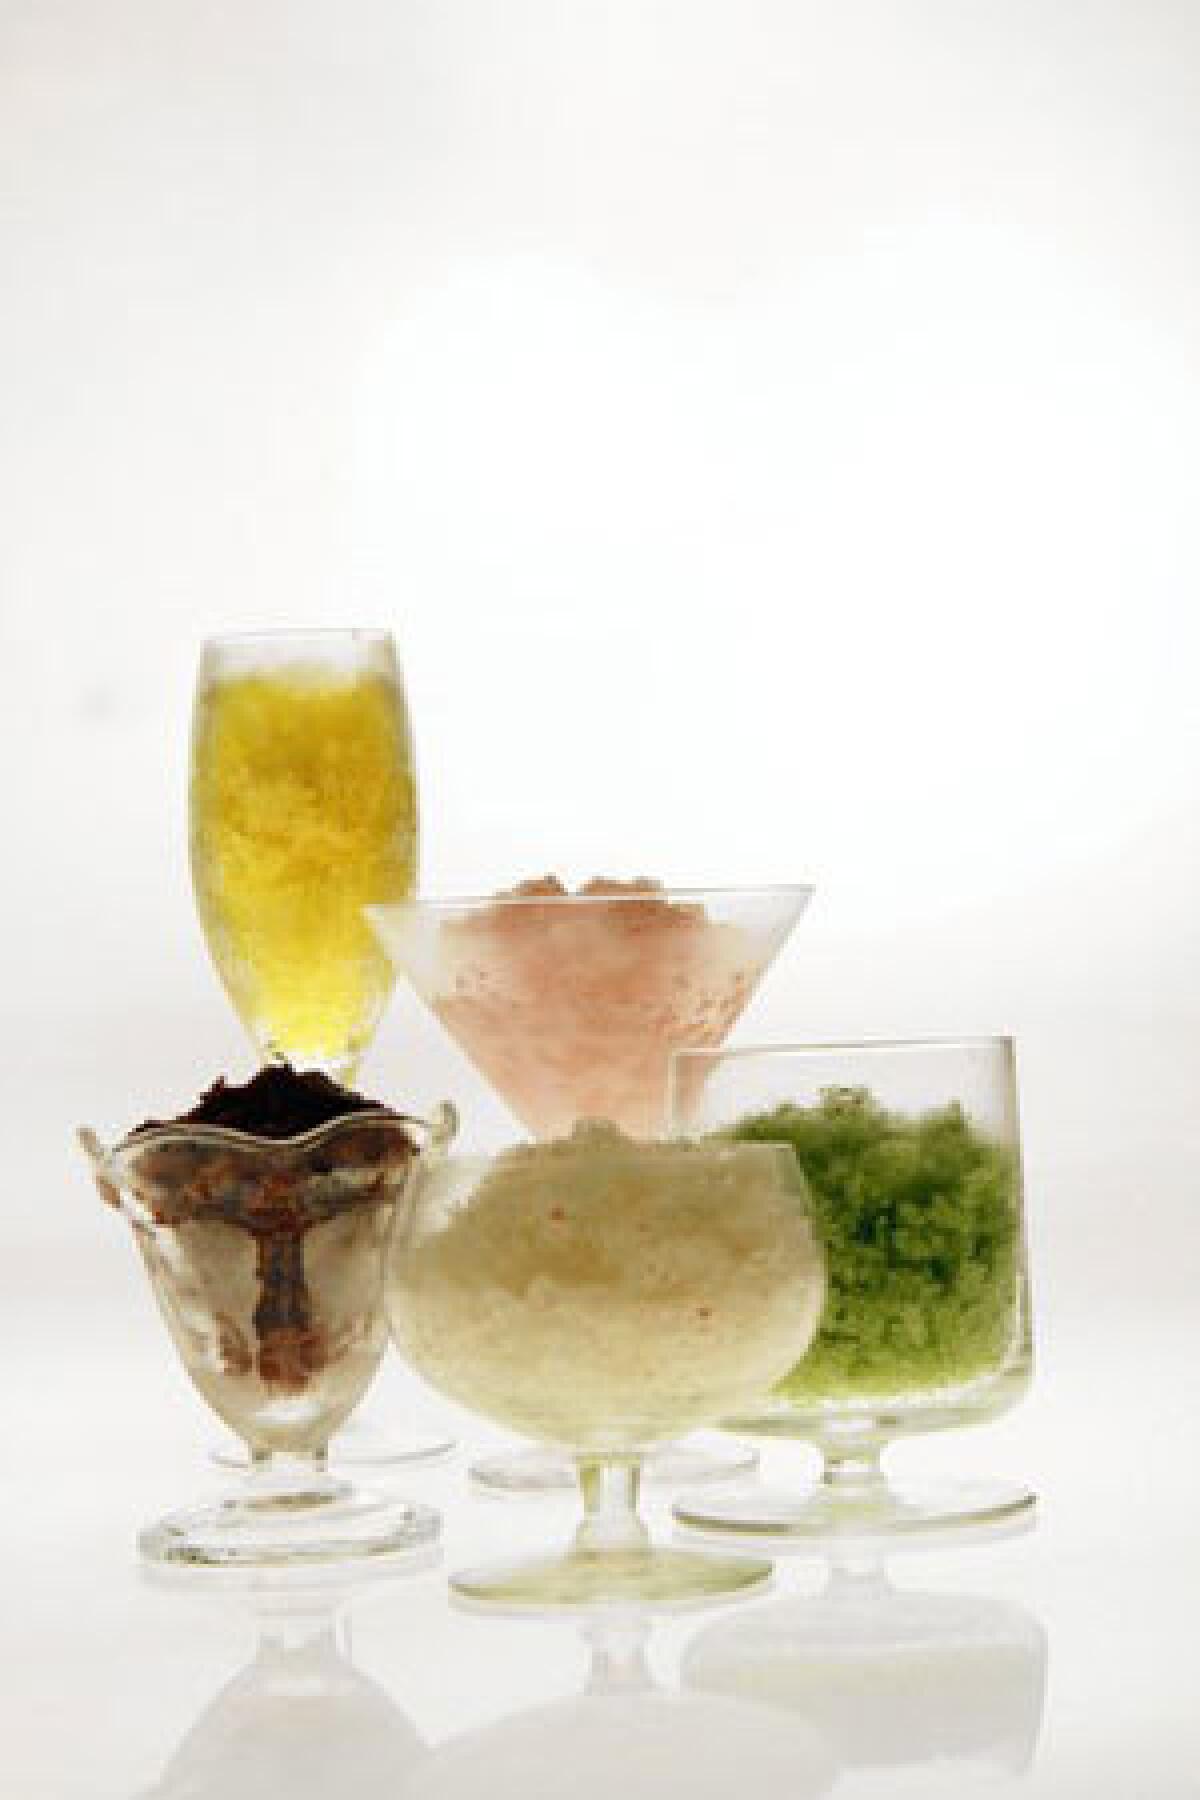 Granita can be made in any flavor you like. Clockwise from left, cherry, mango, rose water, cucumber chile and green tea granitas.